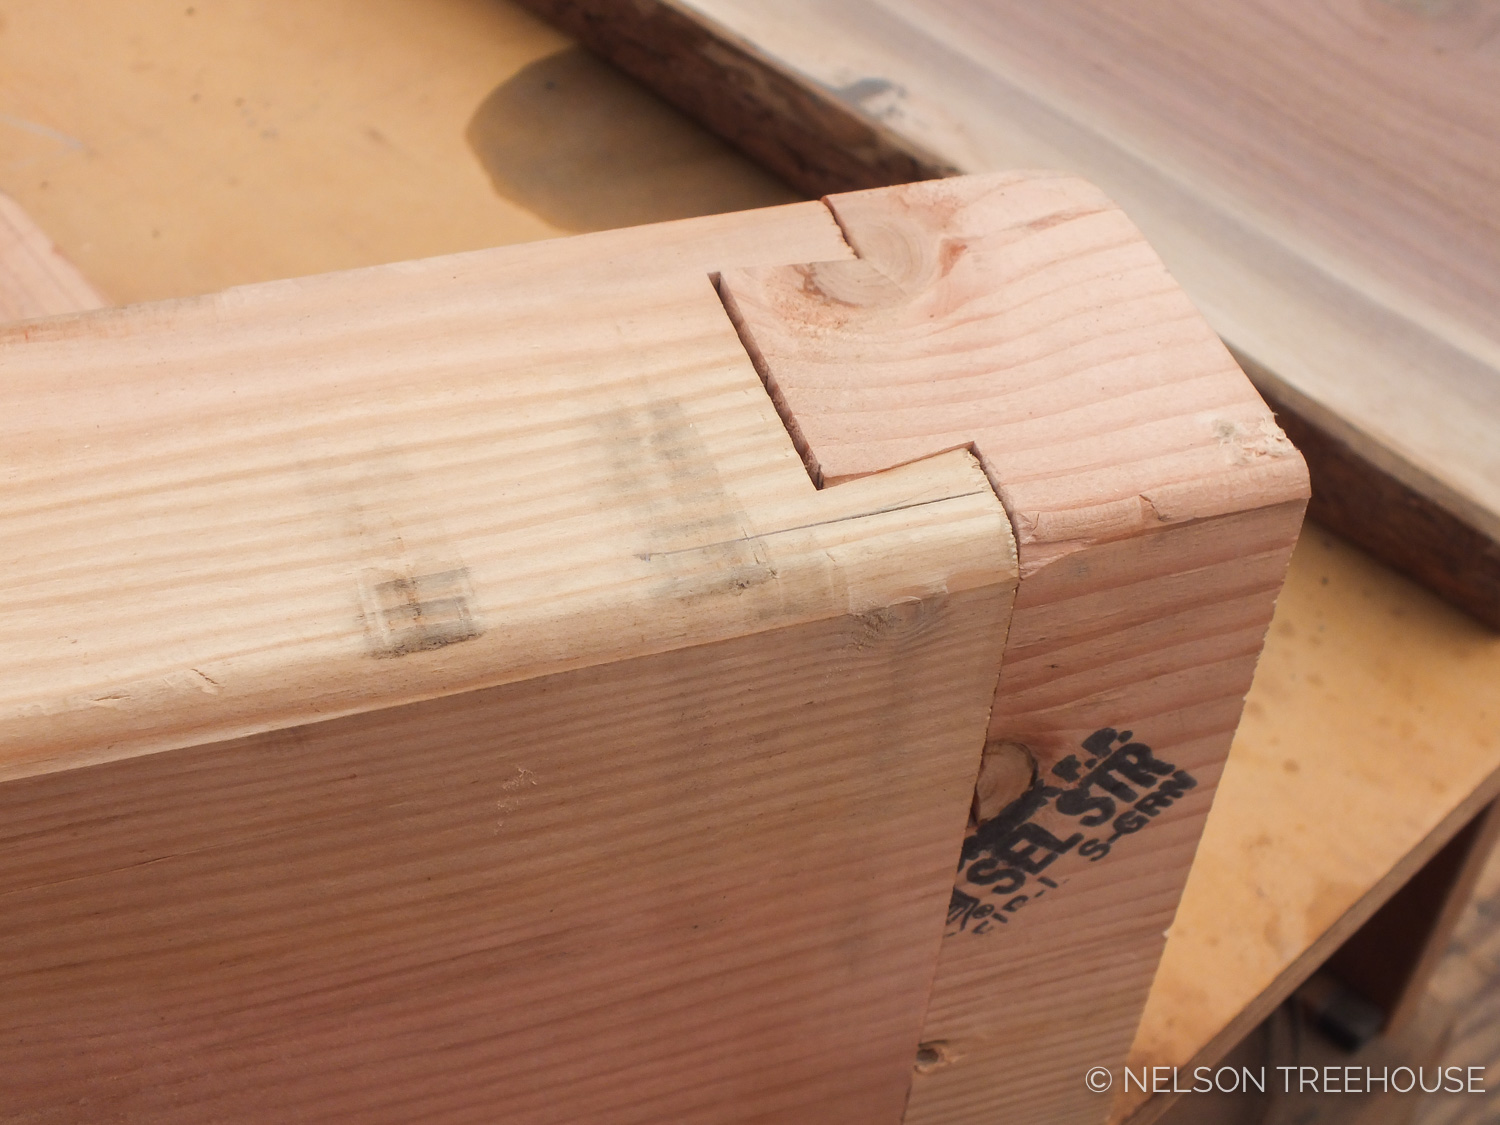  DOVETAIL JOINT 